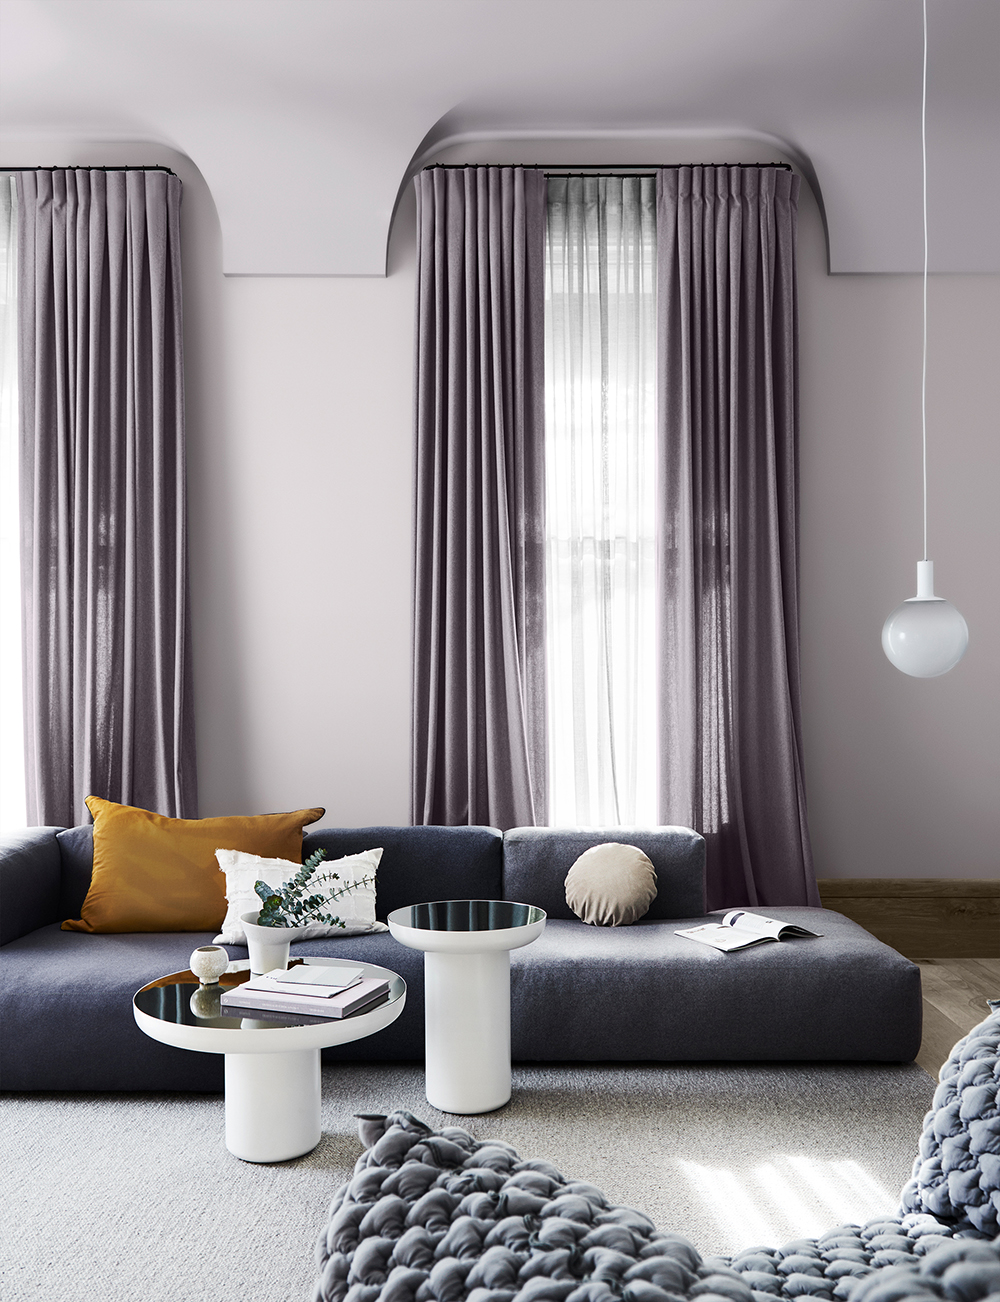 Purple, not pink Millennial pink has reigned for a good few years but now it’s time for a new pastel hue to share the Insta-worthy, Pinterest-grabbing crown. Purple, or more accurately, a grey-lilac (a softer, more usable shade than Pantone’s 2018 colour of the year Ultra Violet) will be 2019’s ‘it’ hue. And with this mauve-takeover, a move toward orange-based pinks (such as peach, apricot and coral) will begin to pick up.